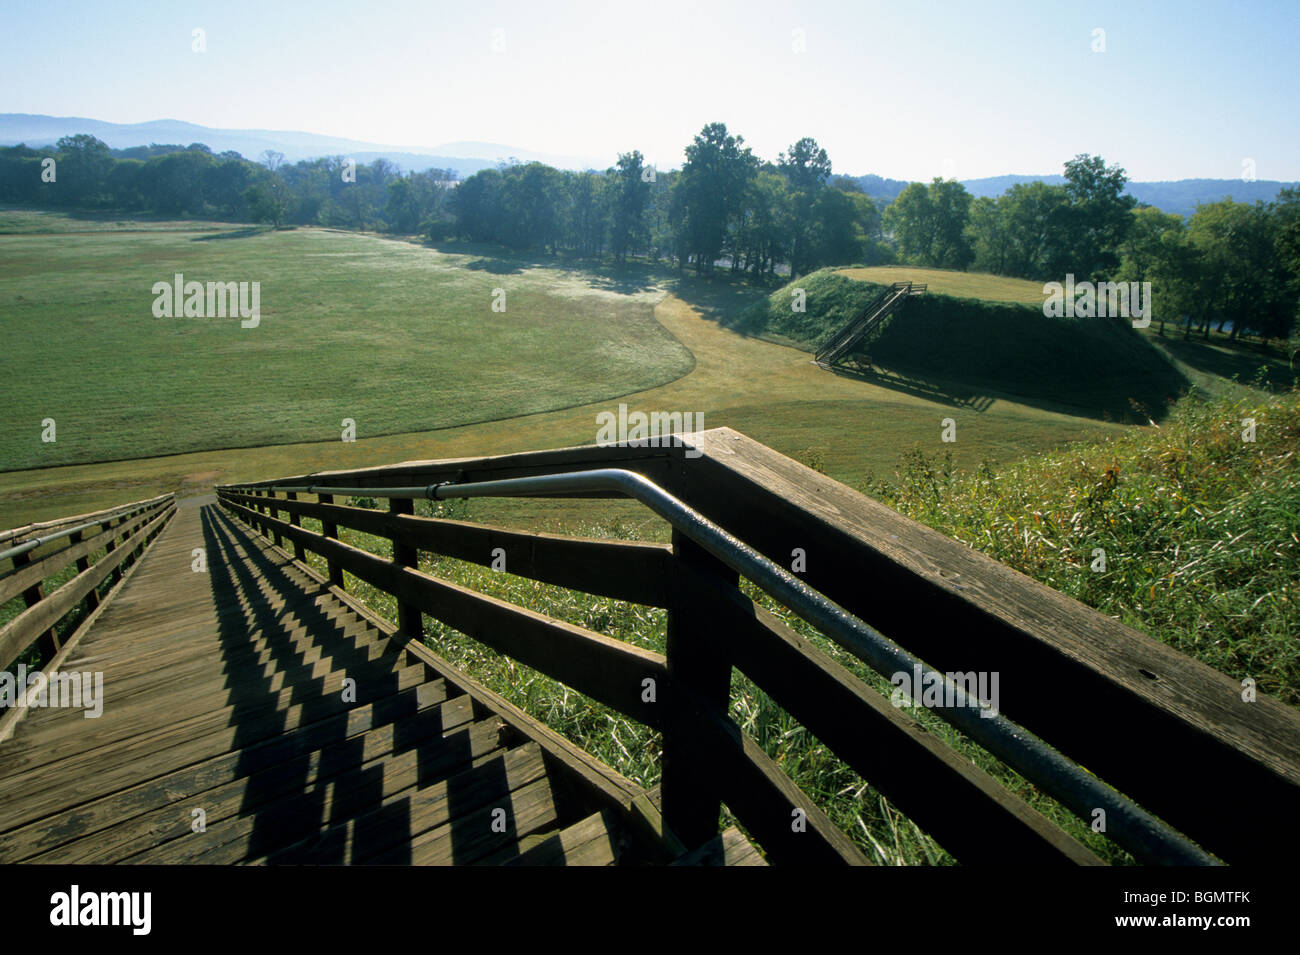 Etowah Indian Mounds State Historic Site that was inhabited around 1000-1500 A.D. Cartersville, Georgia Stock Photo